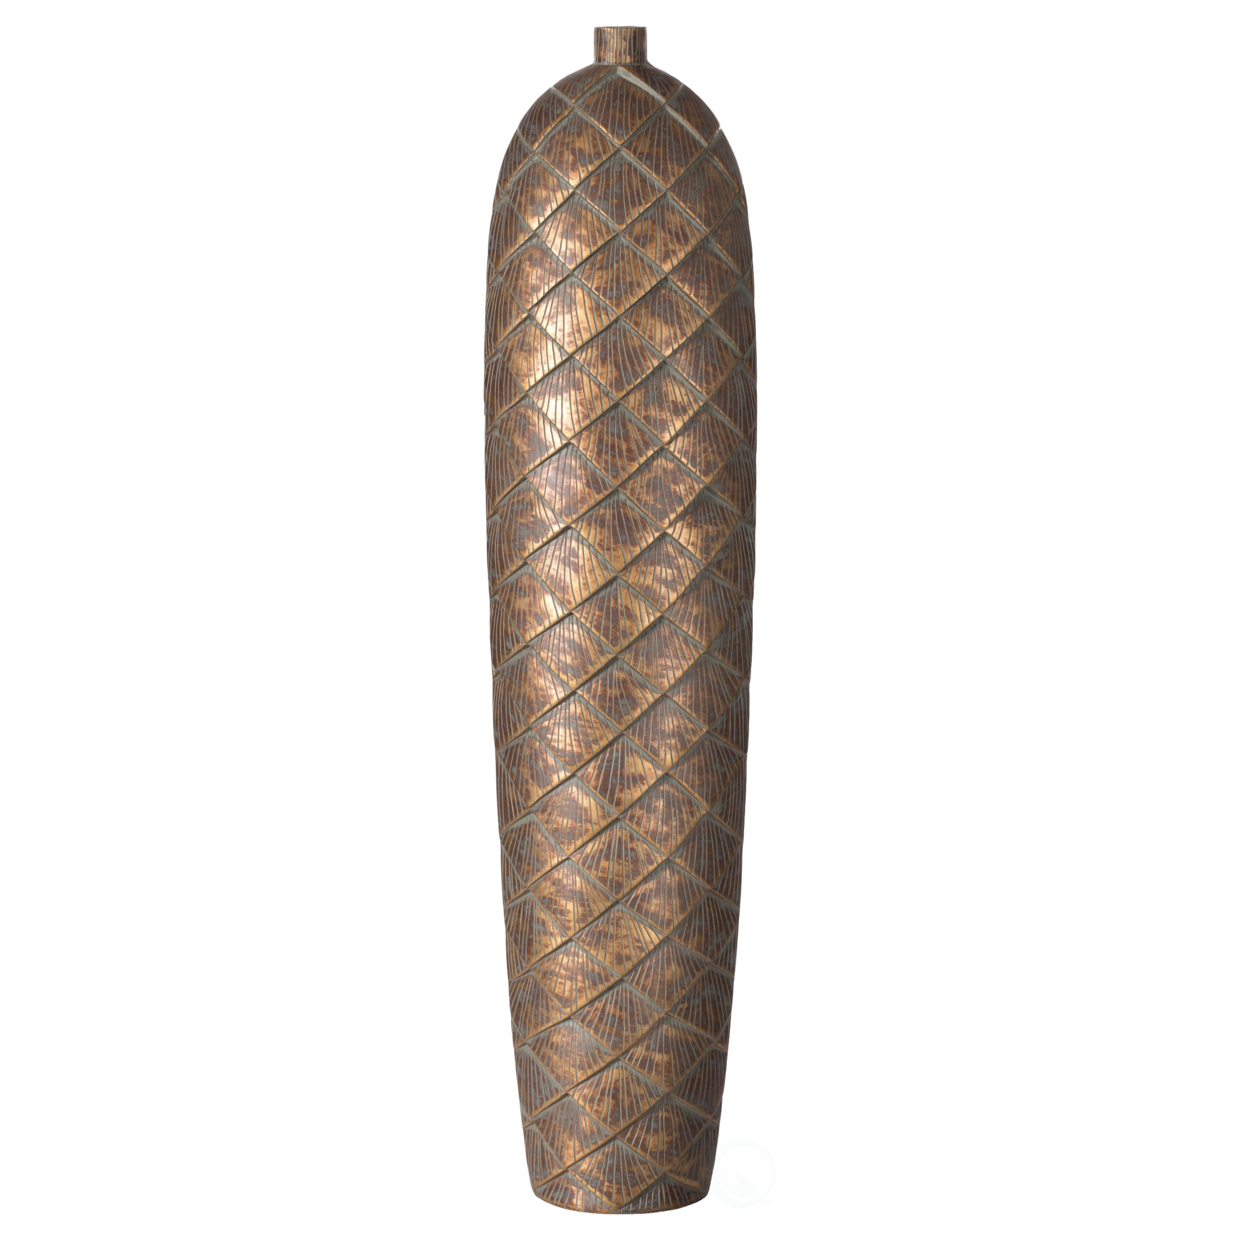 Tall Cylinder Antique Style Designed Floor Vase For Entryway Dining Or Living Room, Ceramic Rustic